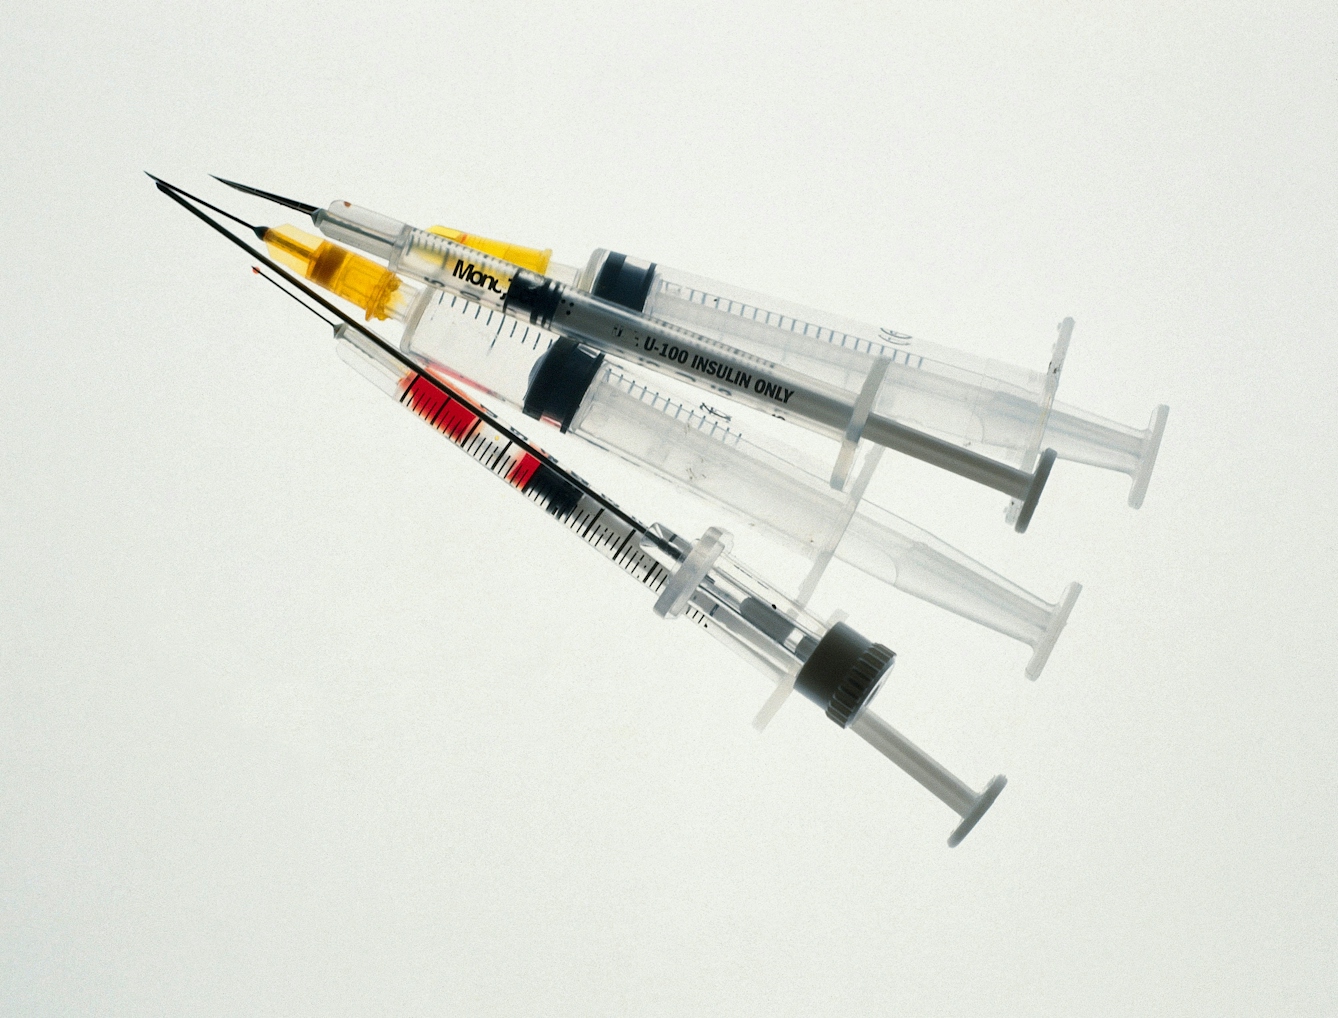 Modern syringes made of plastic with measure lines. One is labelled "insulin only".